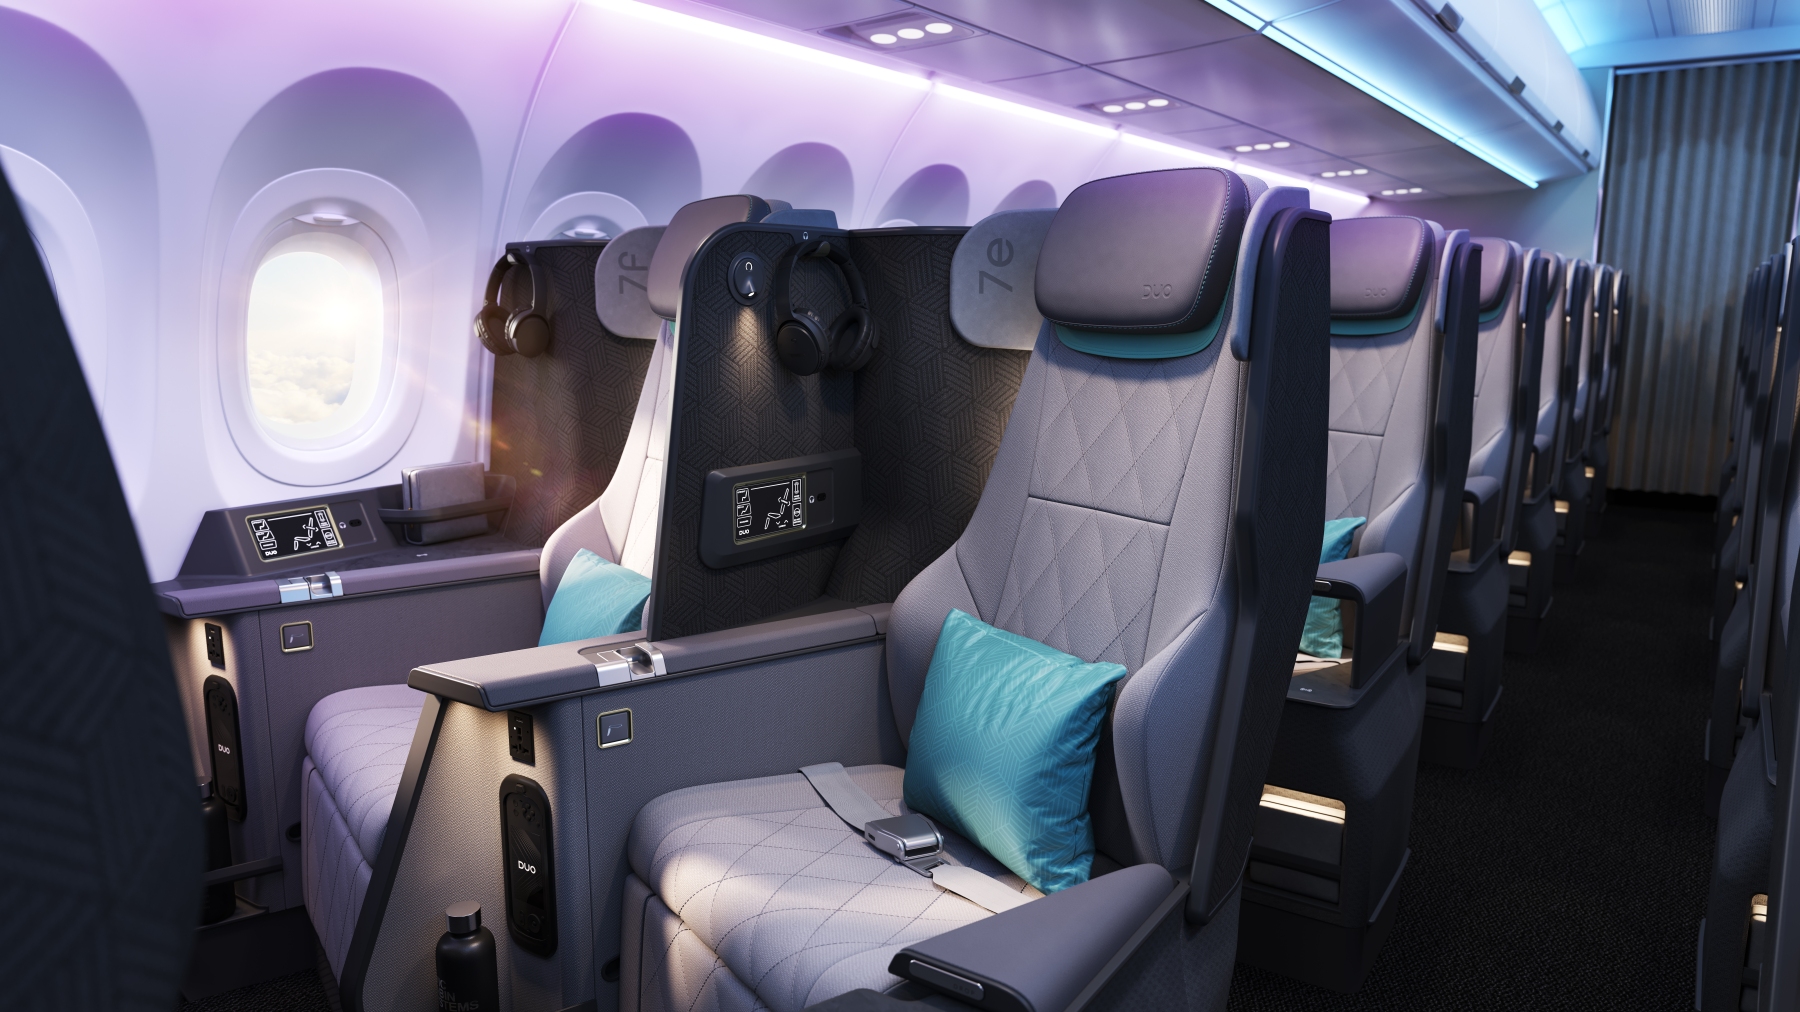 Vantage DUO looks to upgrade the regional First Class proposition